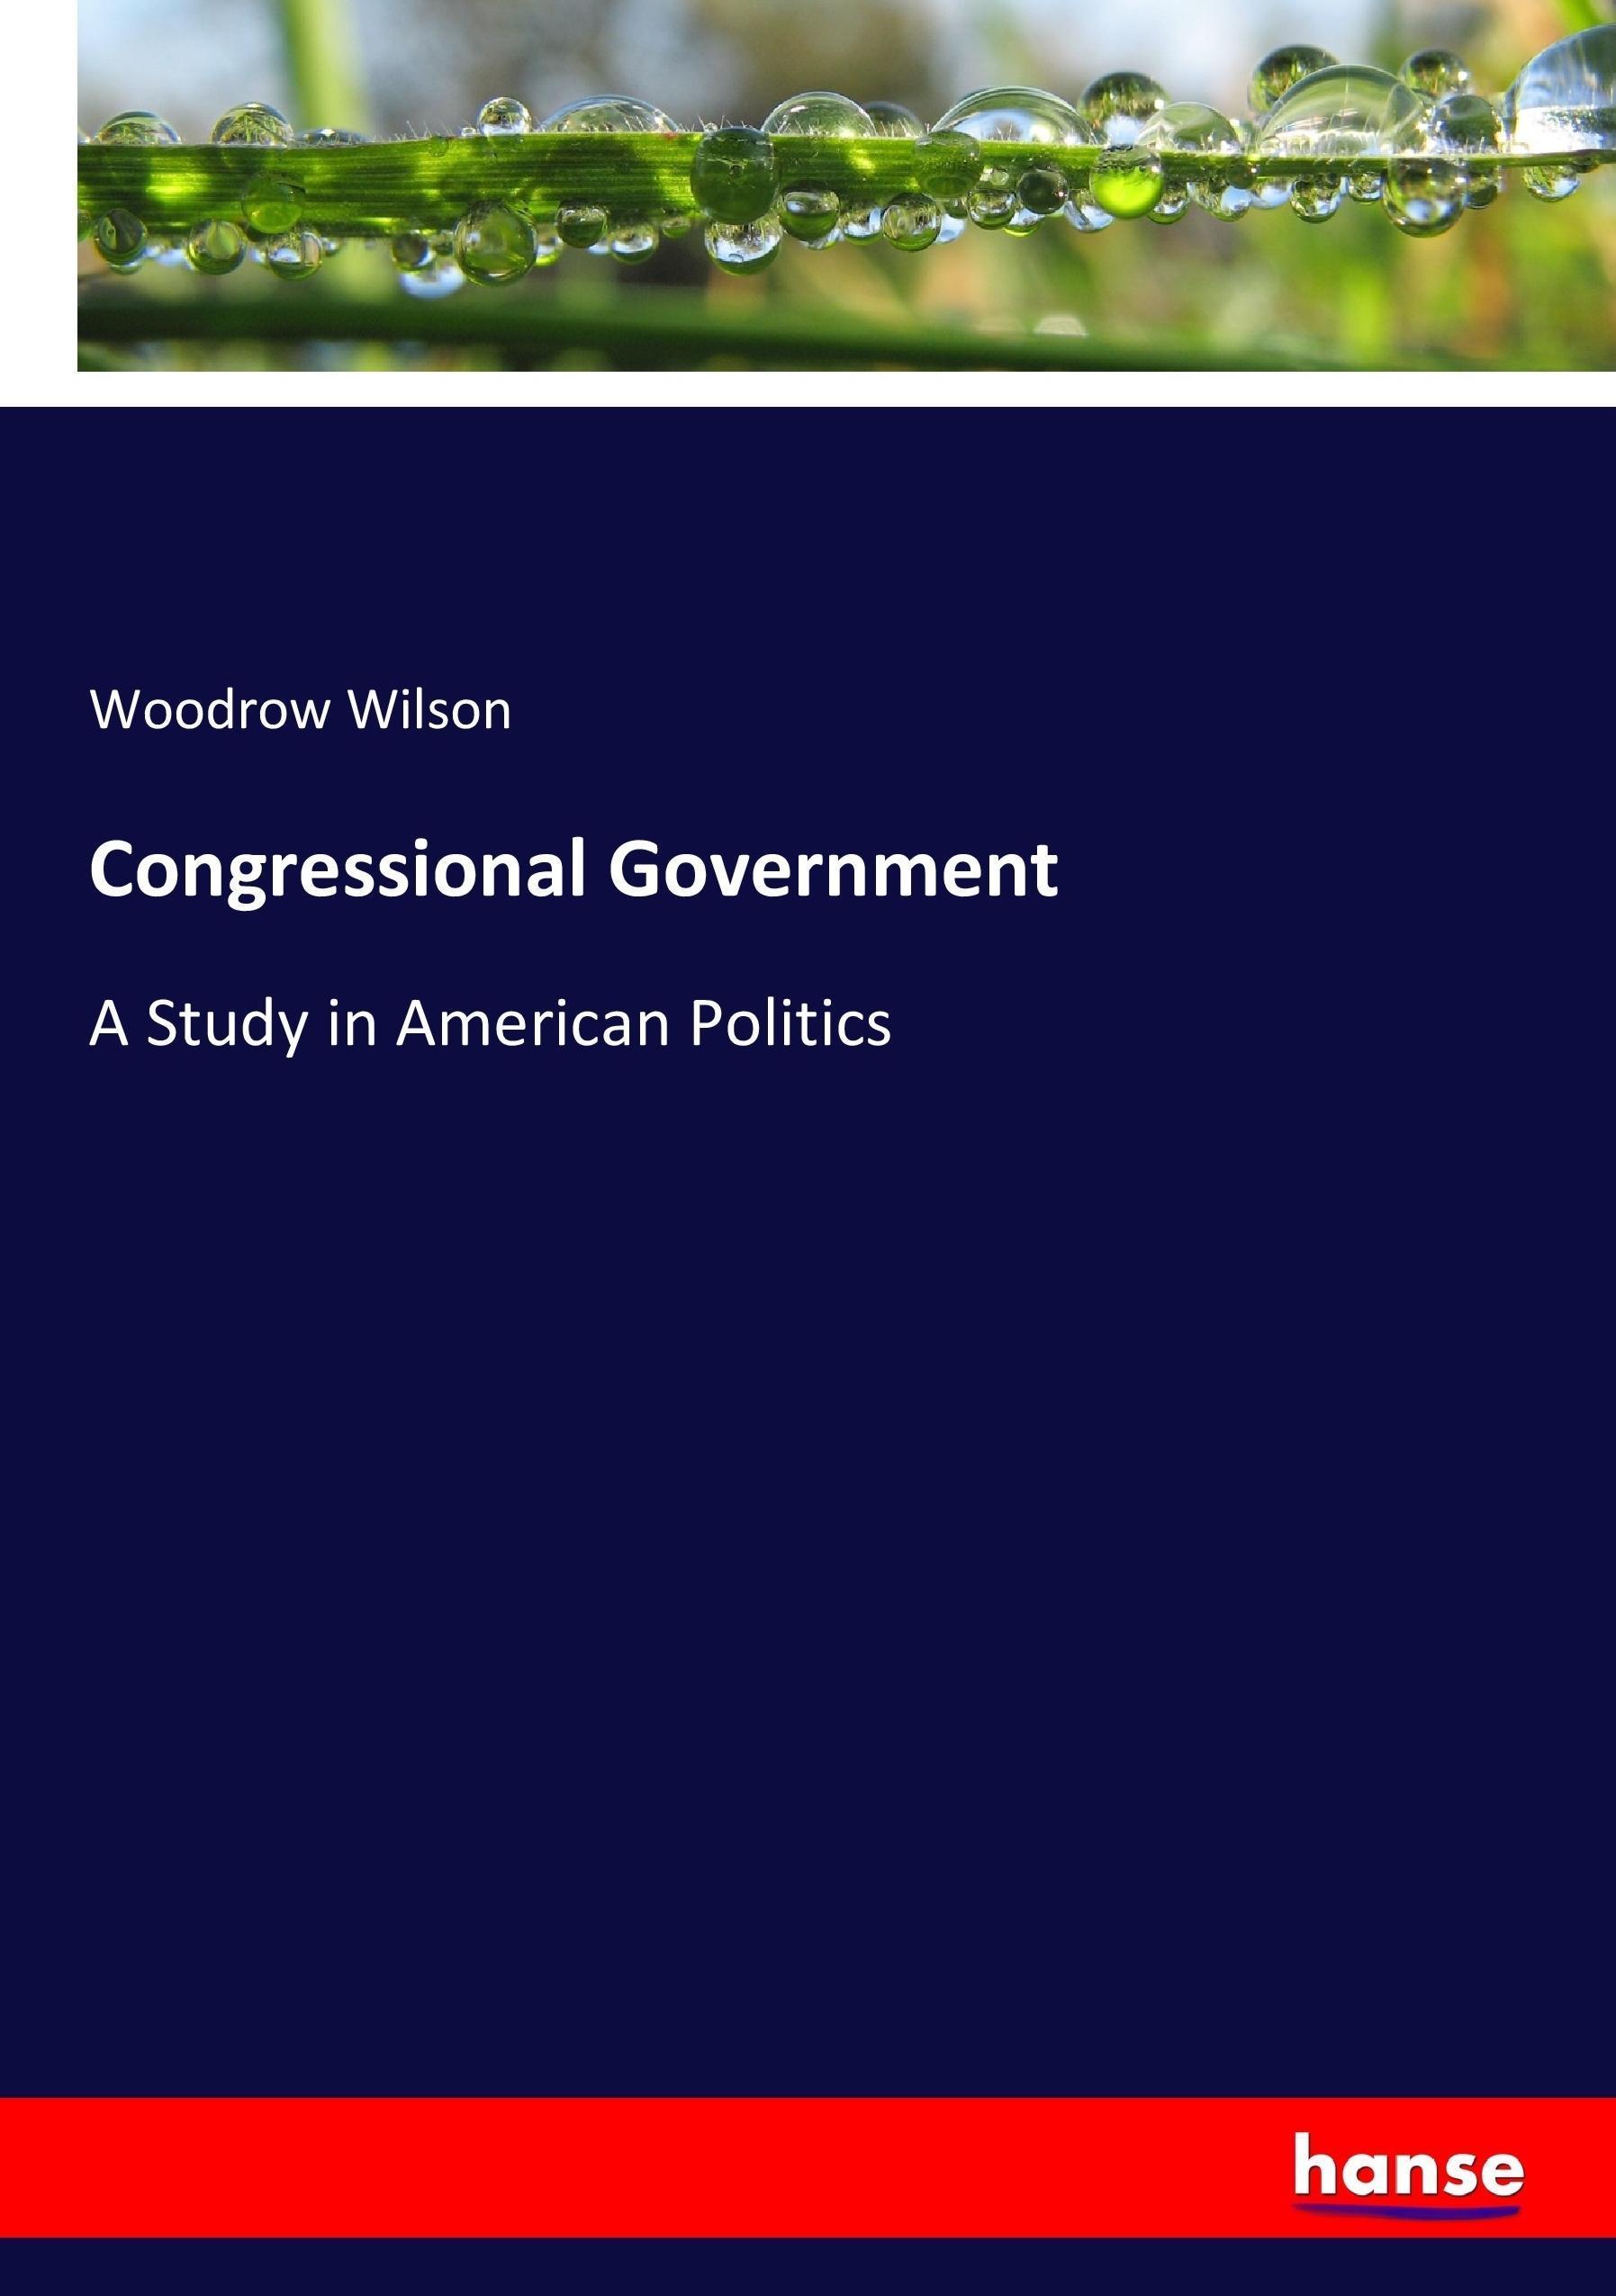 Congressional Government - Wilson, Woodrow